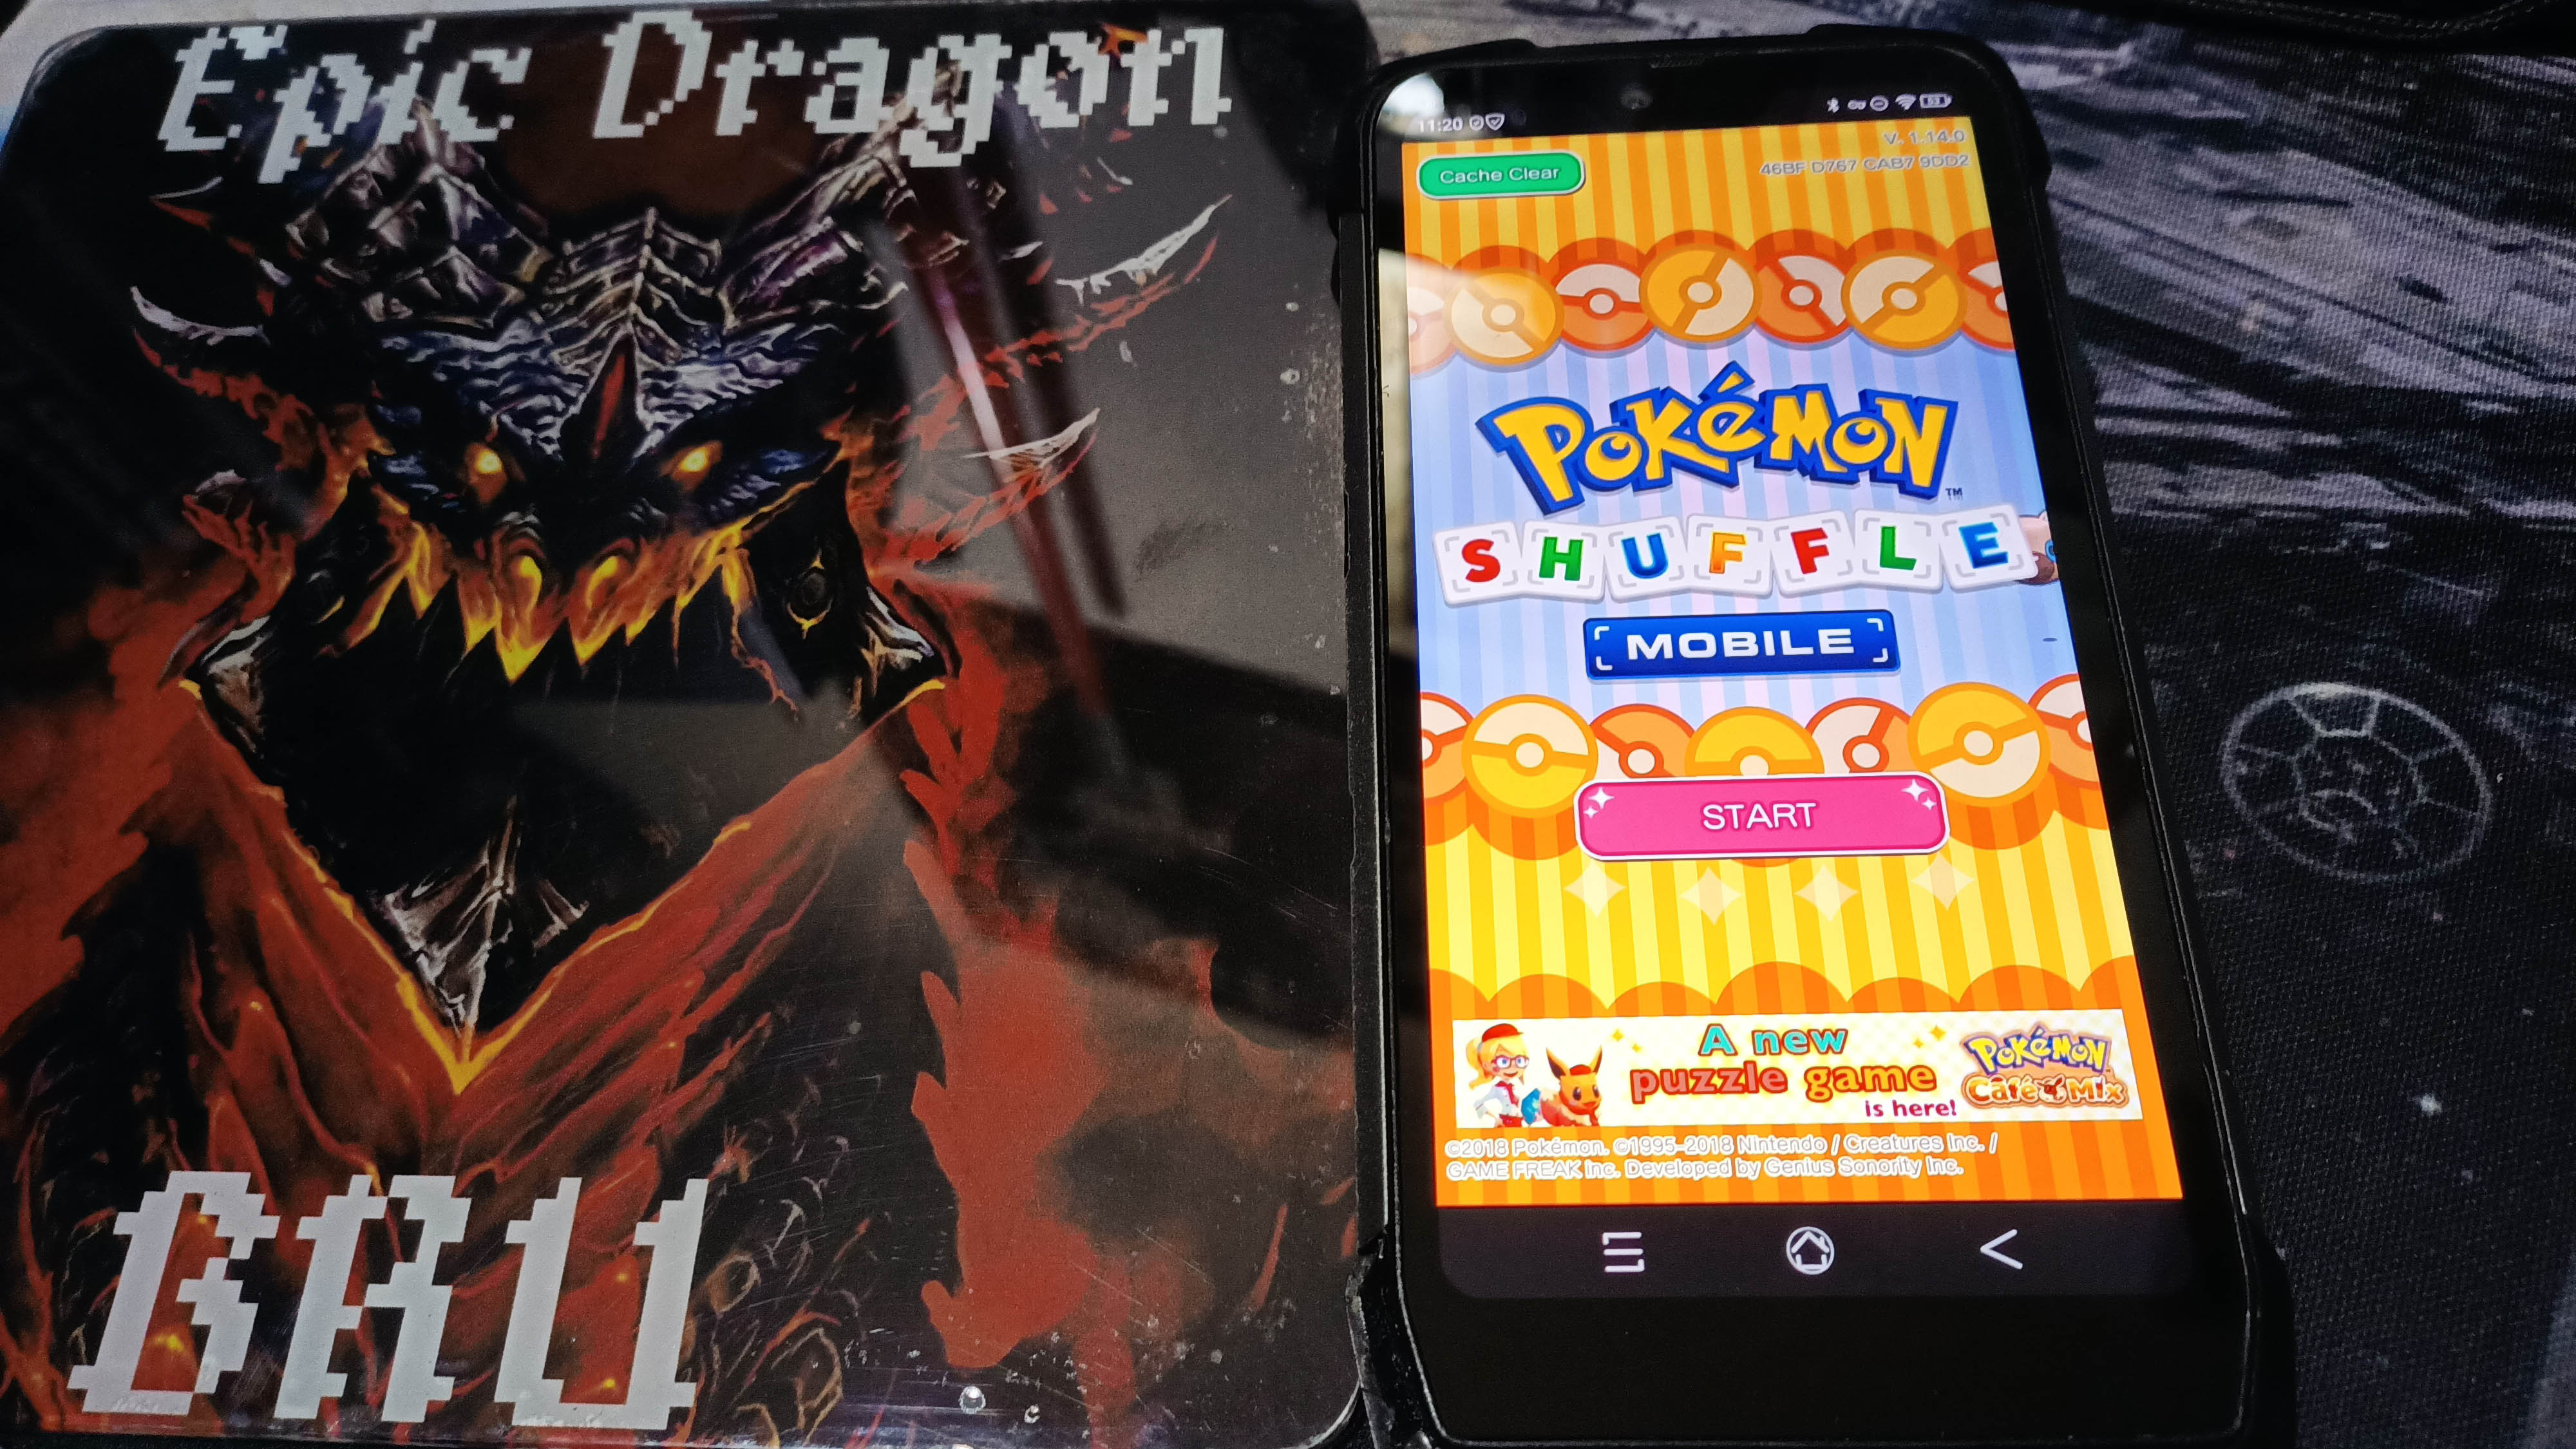 EpicDragon: Pokemon Shuffle Mobile: Stage 003 (Android) 5,559 points on 2022-09-02 17:26:33